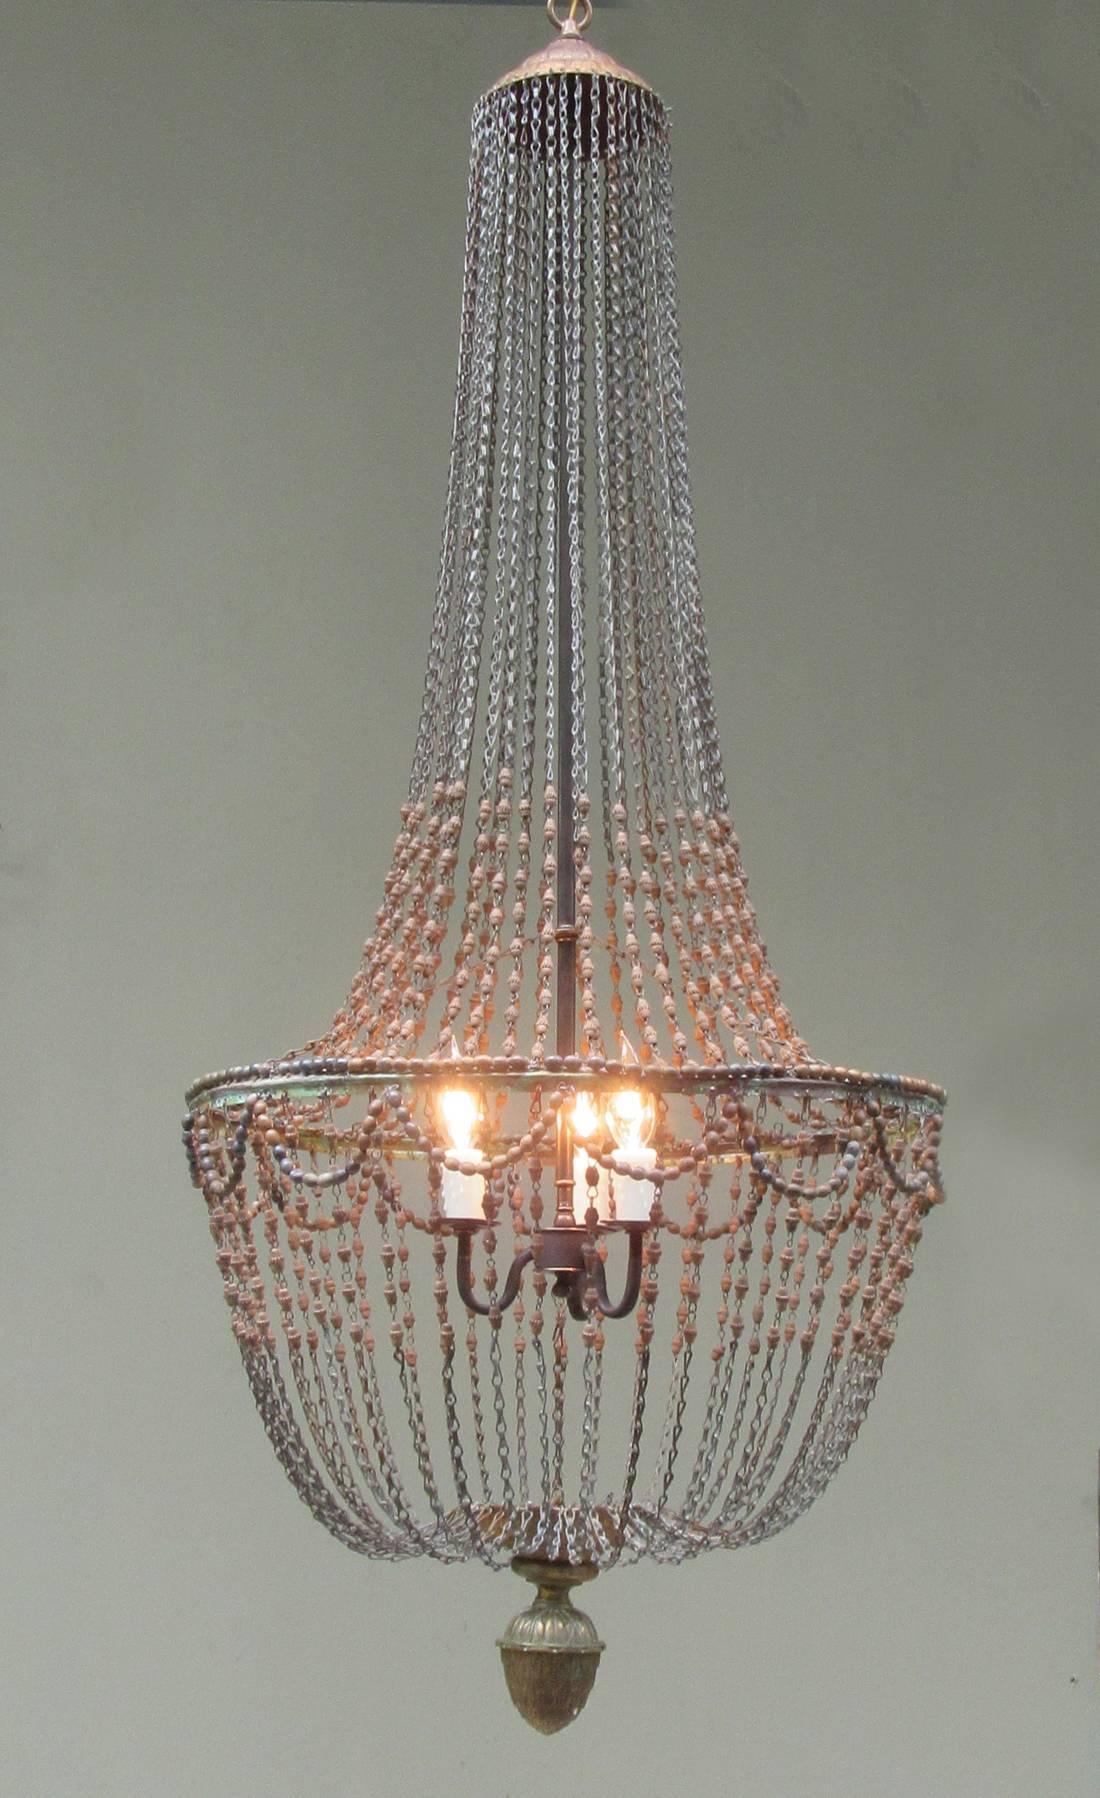 A tall early 20th century Italian Empire basket chandelier, circa 1900, featuring hand-carved wooden beads, three candle bulb pendant drop and finely detailed brass pine cone finial. The chandelier has recently been cleaned and rewired with new